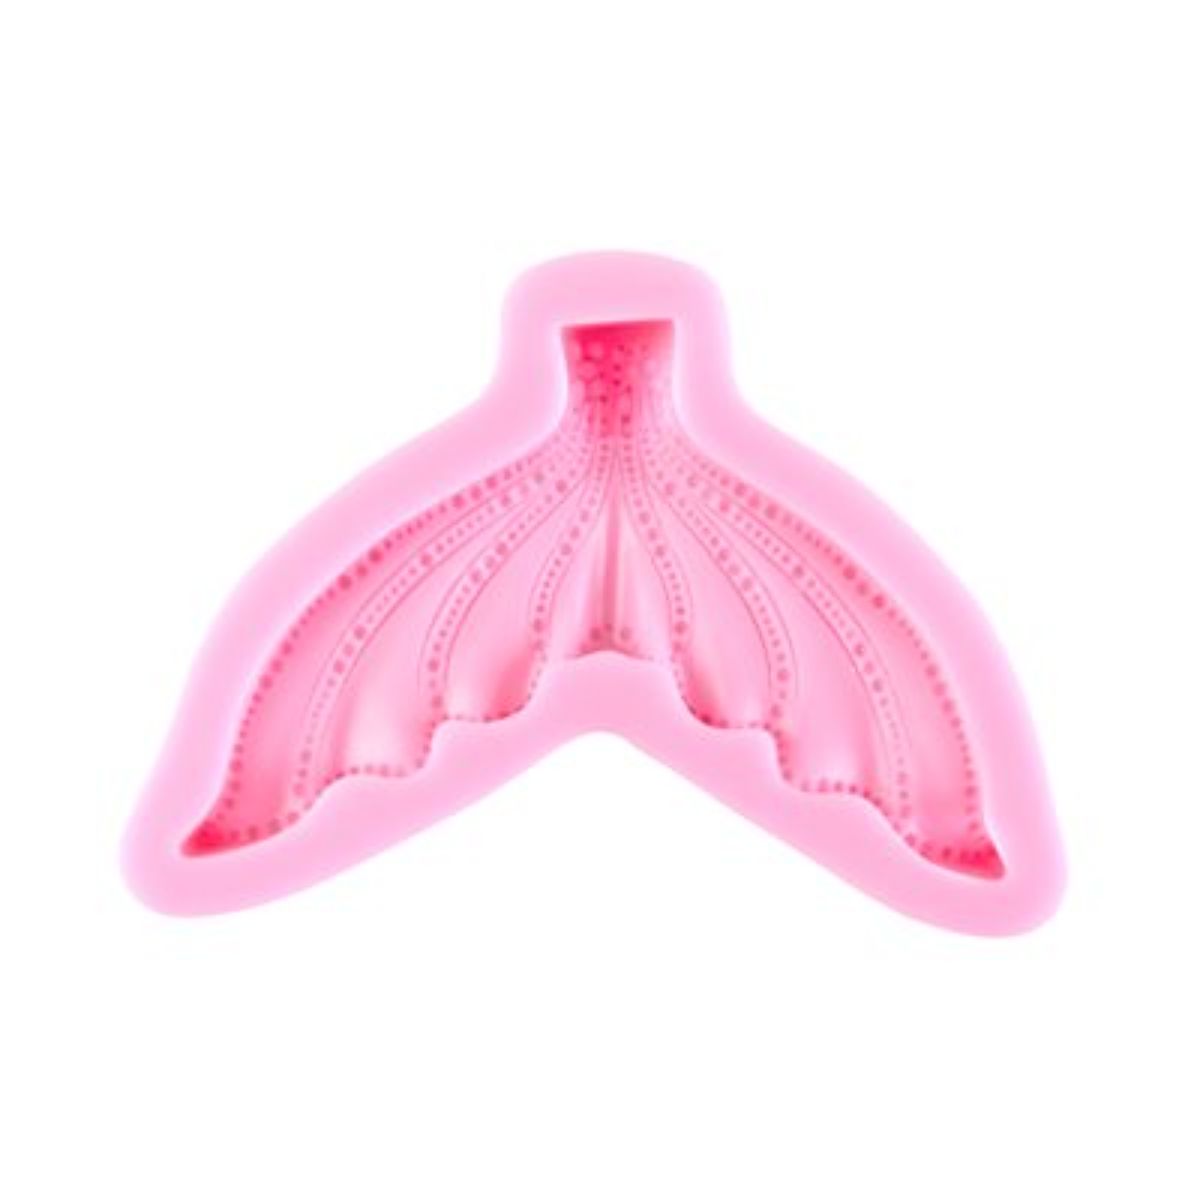 NY Cake Silicone Wide Mermaid Tail Mold